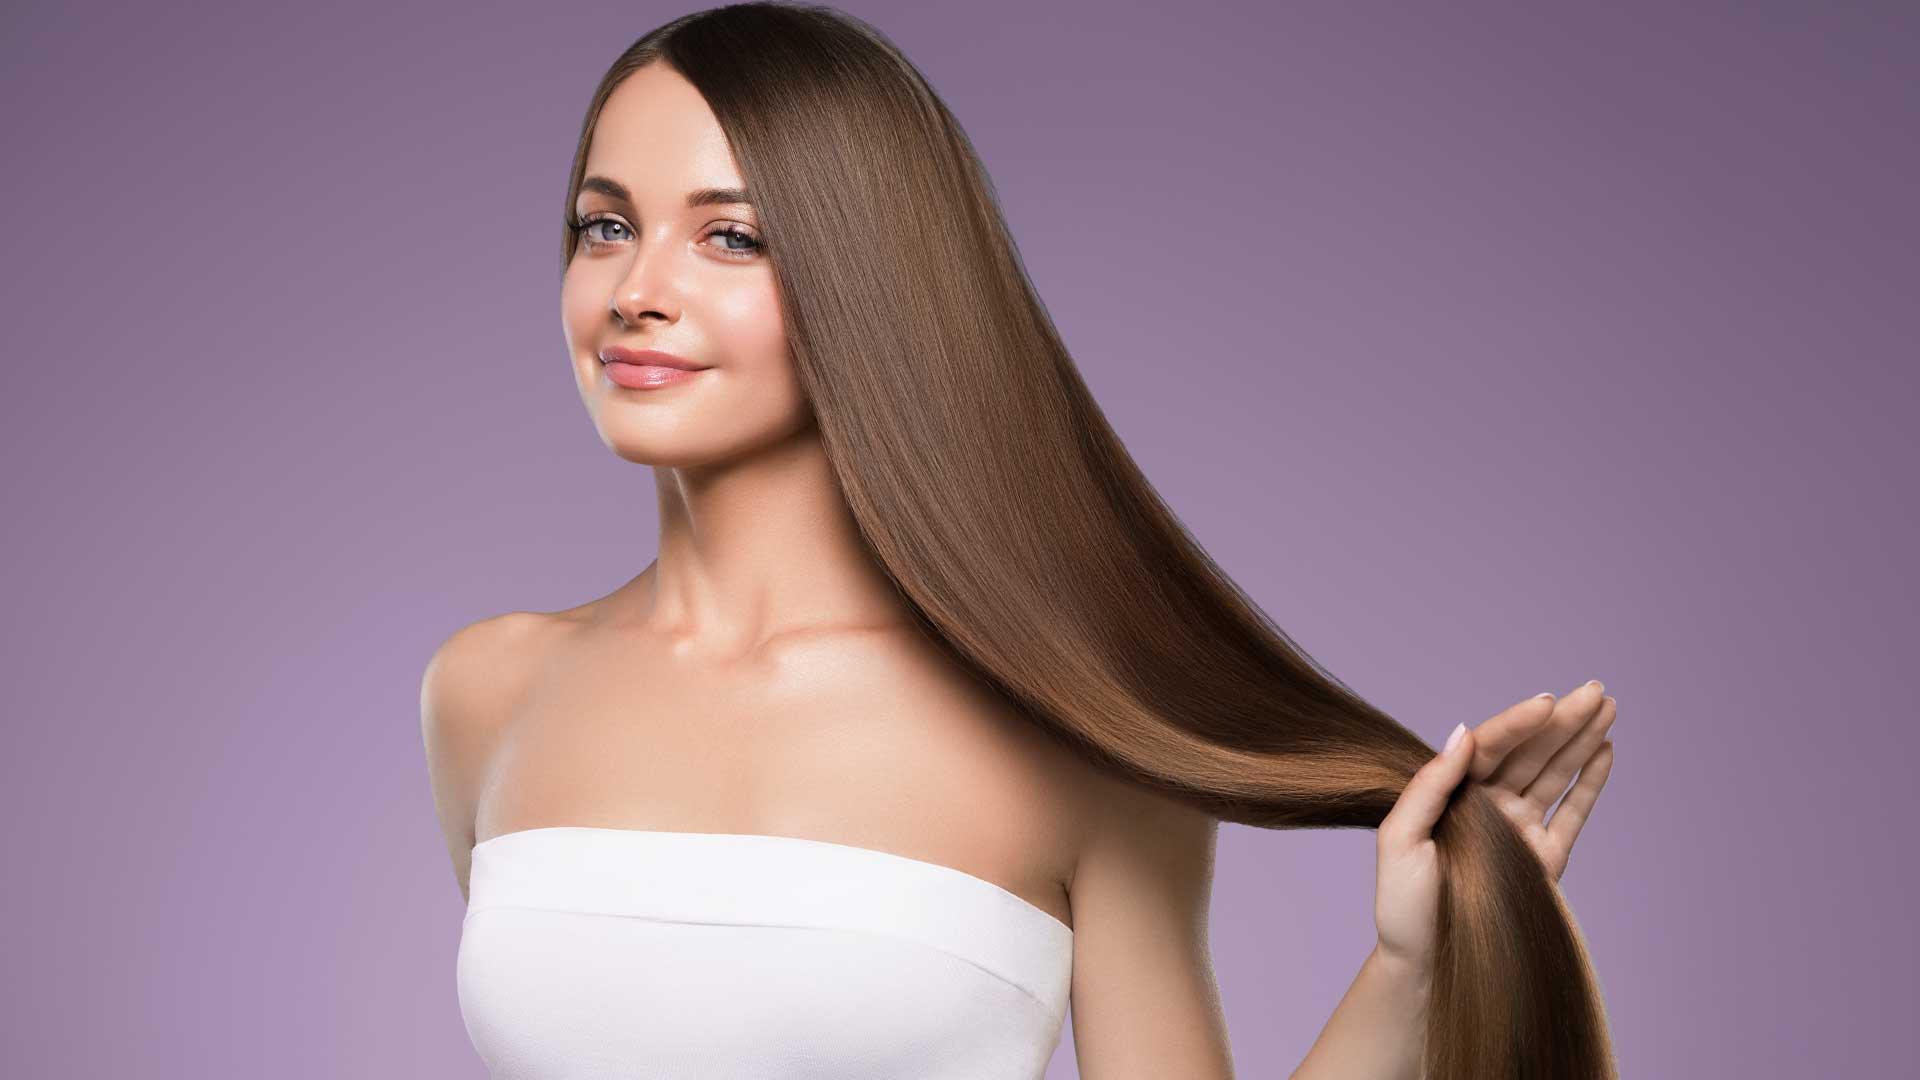 HOW TO GROW YOUR HAIR LONGER & HEALTHIER